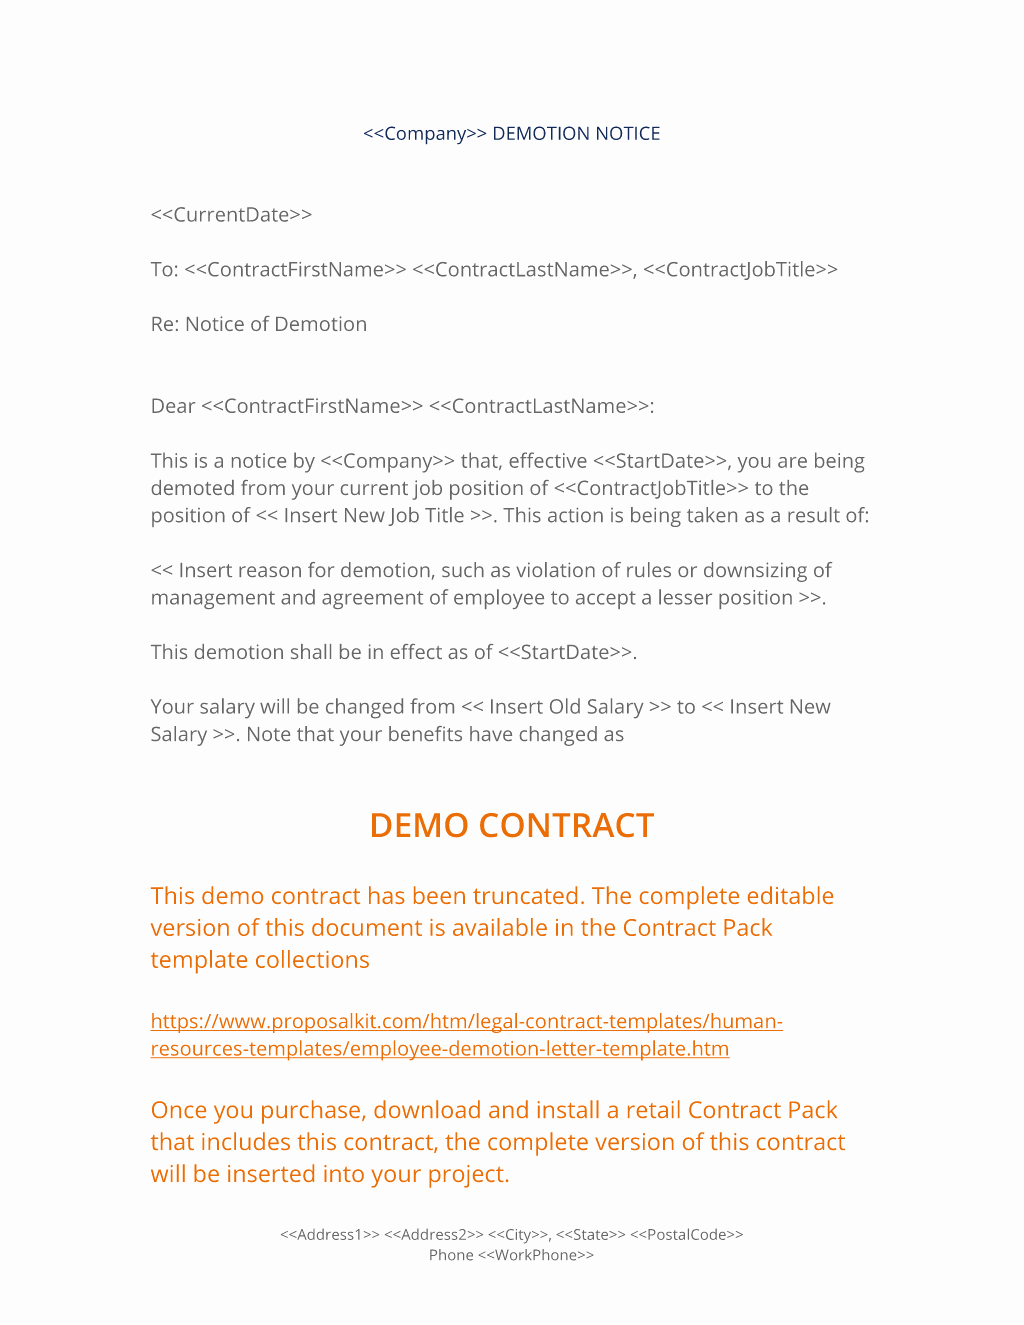 Sample Letter for Employees Unique Employee Demotion Letter 3 Easy Steps